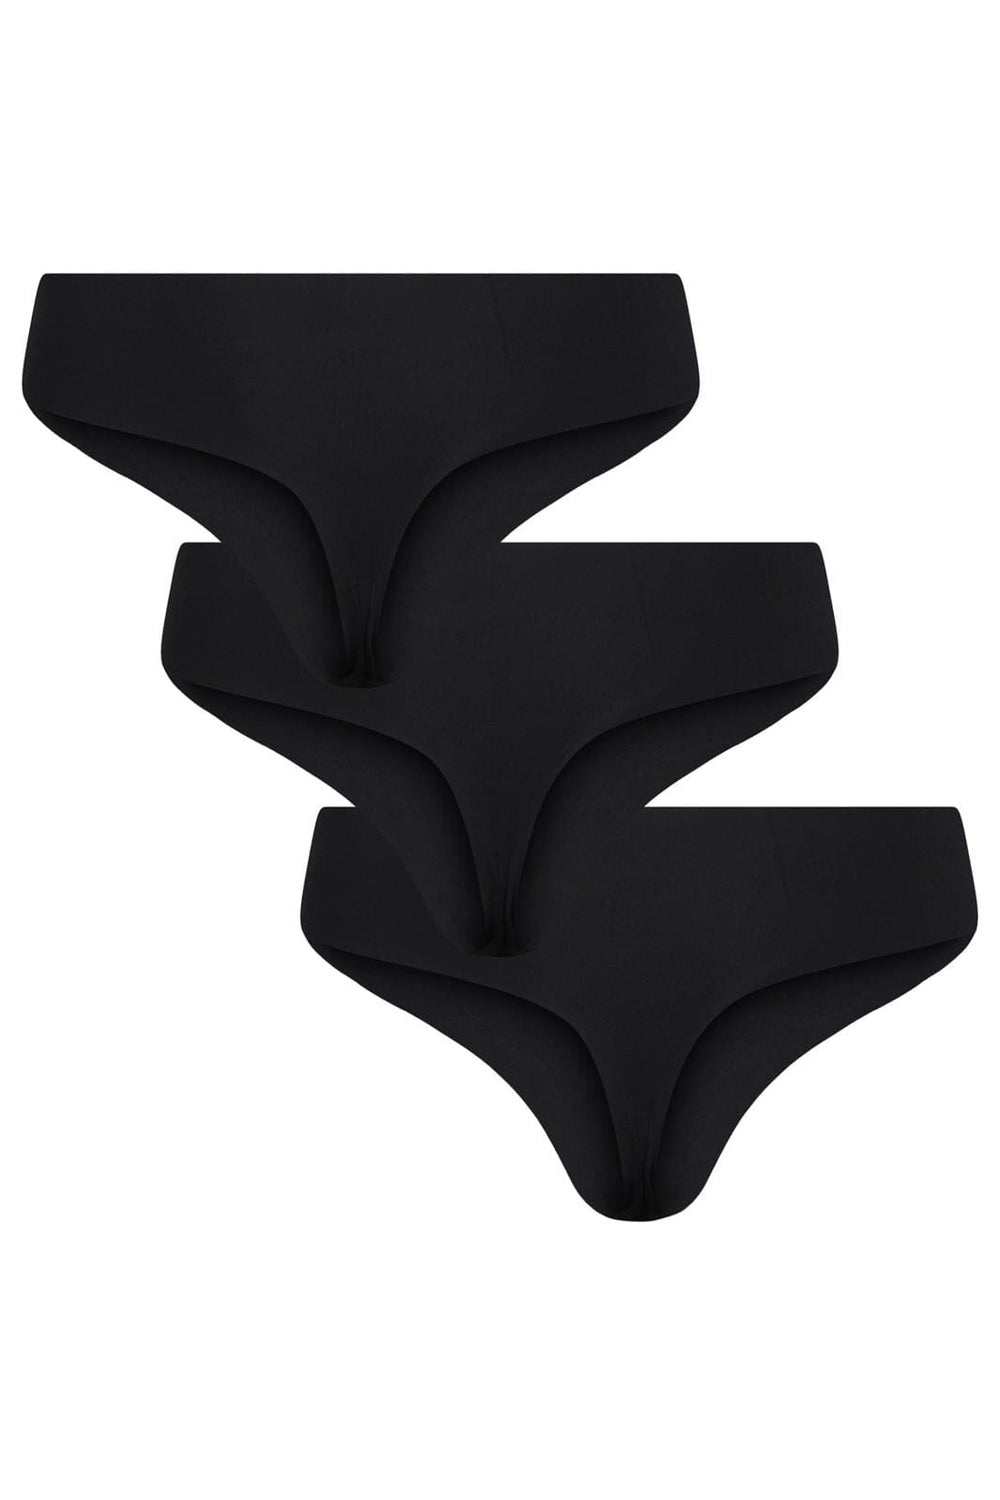 Pieces, Pcnamee Thong 3-Pack, Black 3